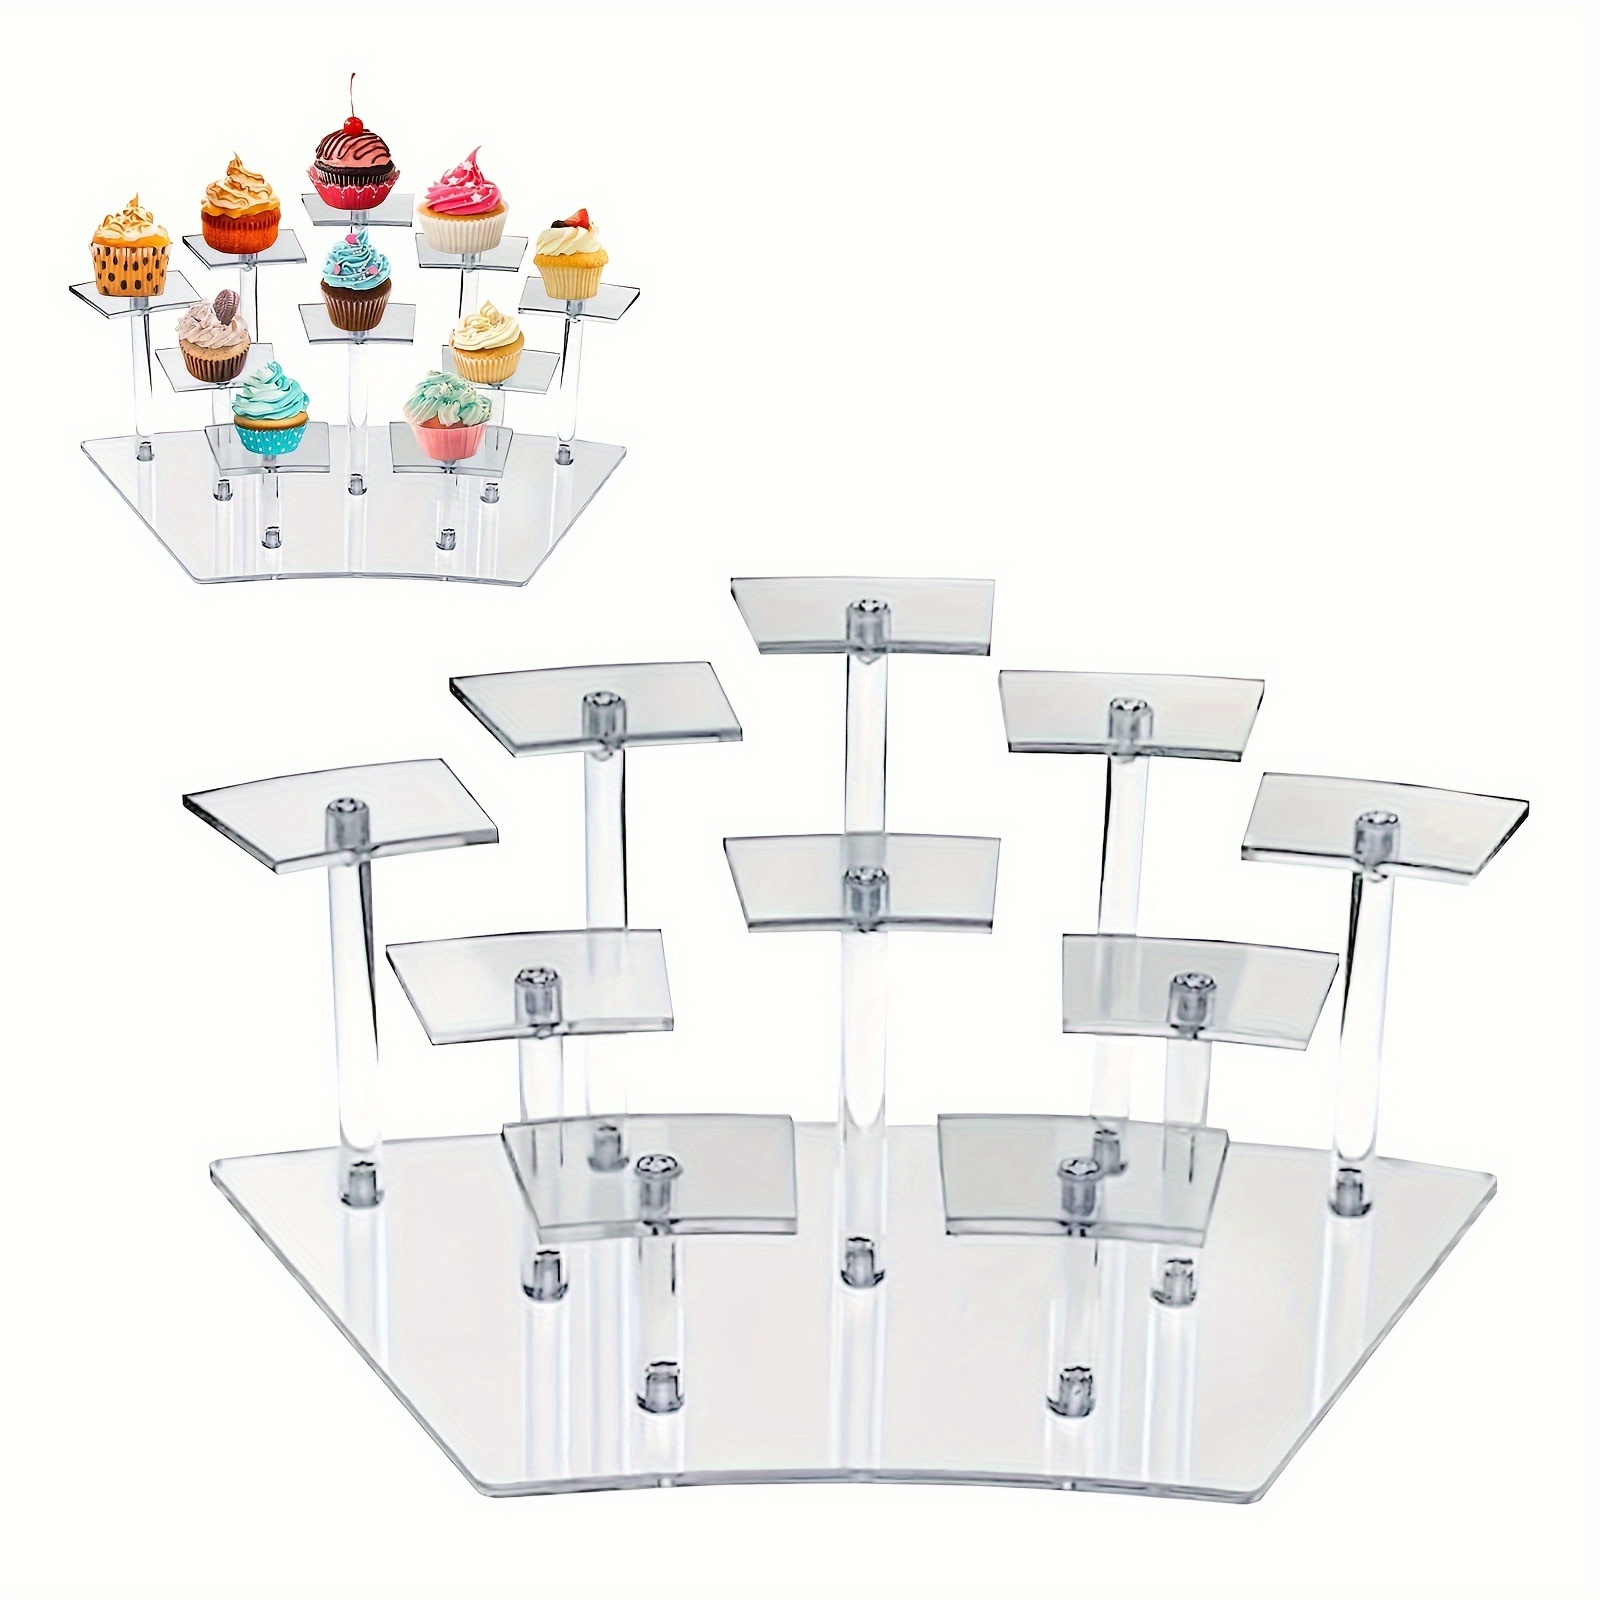 

10-tier Acrylic Display Stand For Action Figures, Cupcakes, Desserts, And Perfume - Classic Style Multilevel Display Risers, No Electricity Needed, Clear Organizer For Decor And Storage